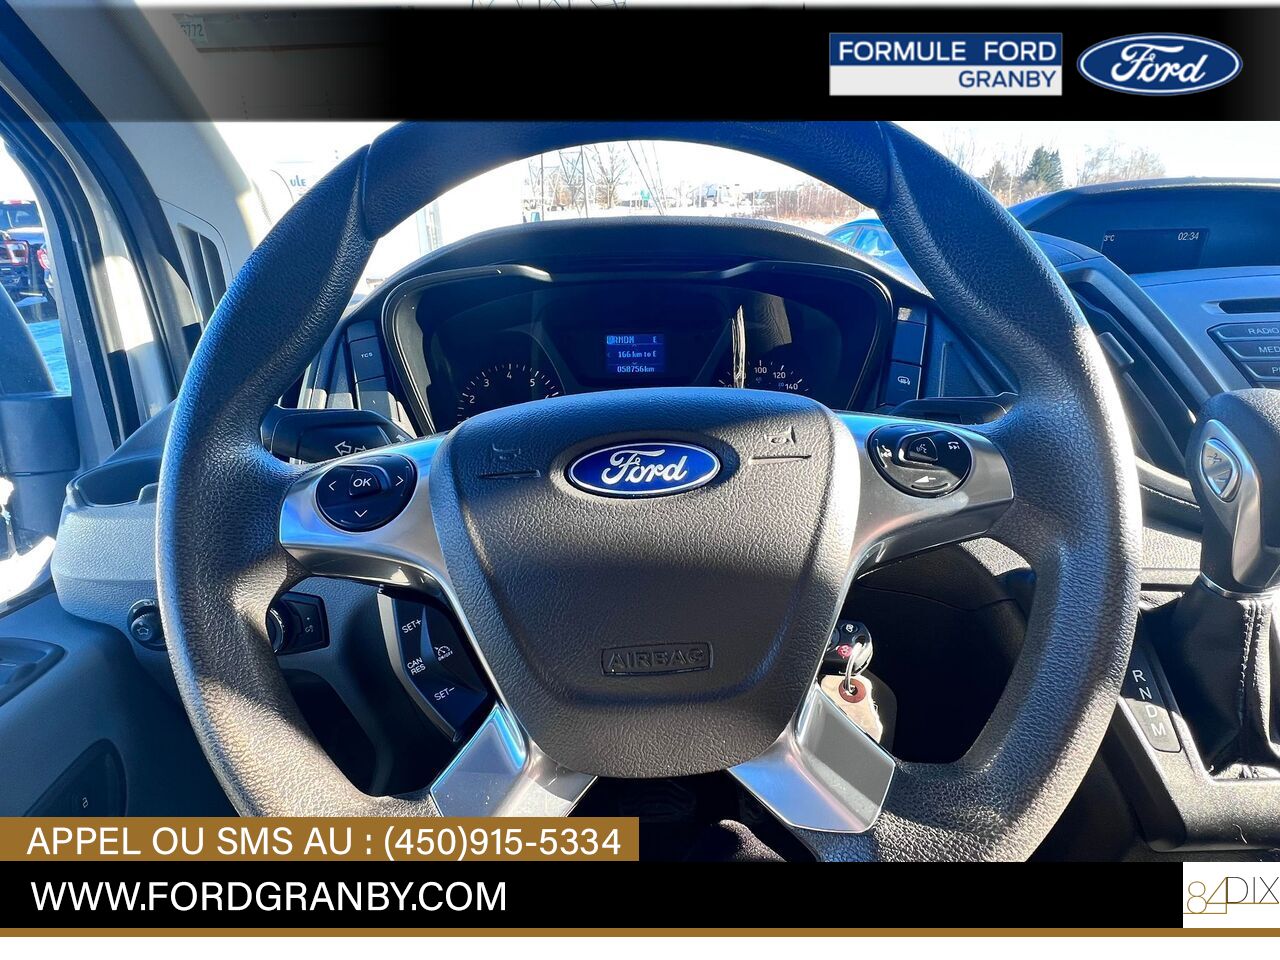 Ford Transit fourgon utilitaire 2019 Granby - photo #15